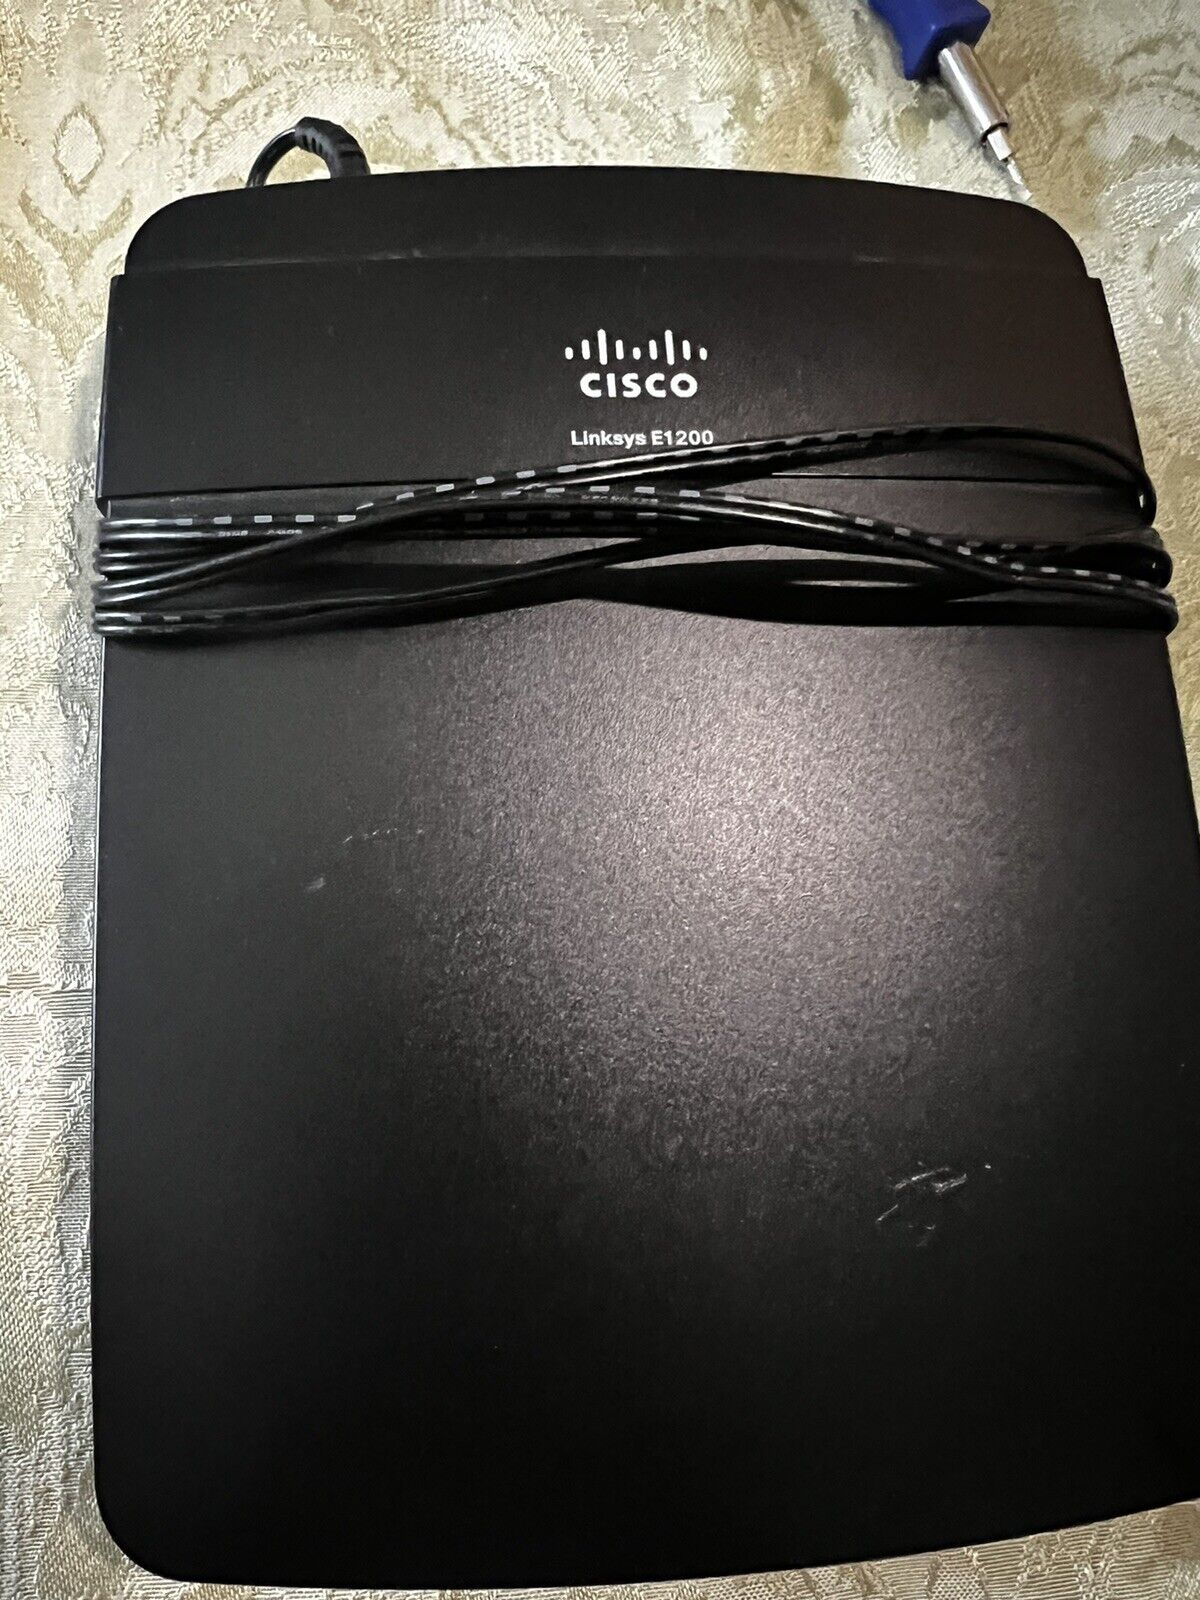 CISCO Linksys E1200 802.11n WiFi Router Lights Turn On. 